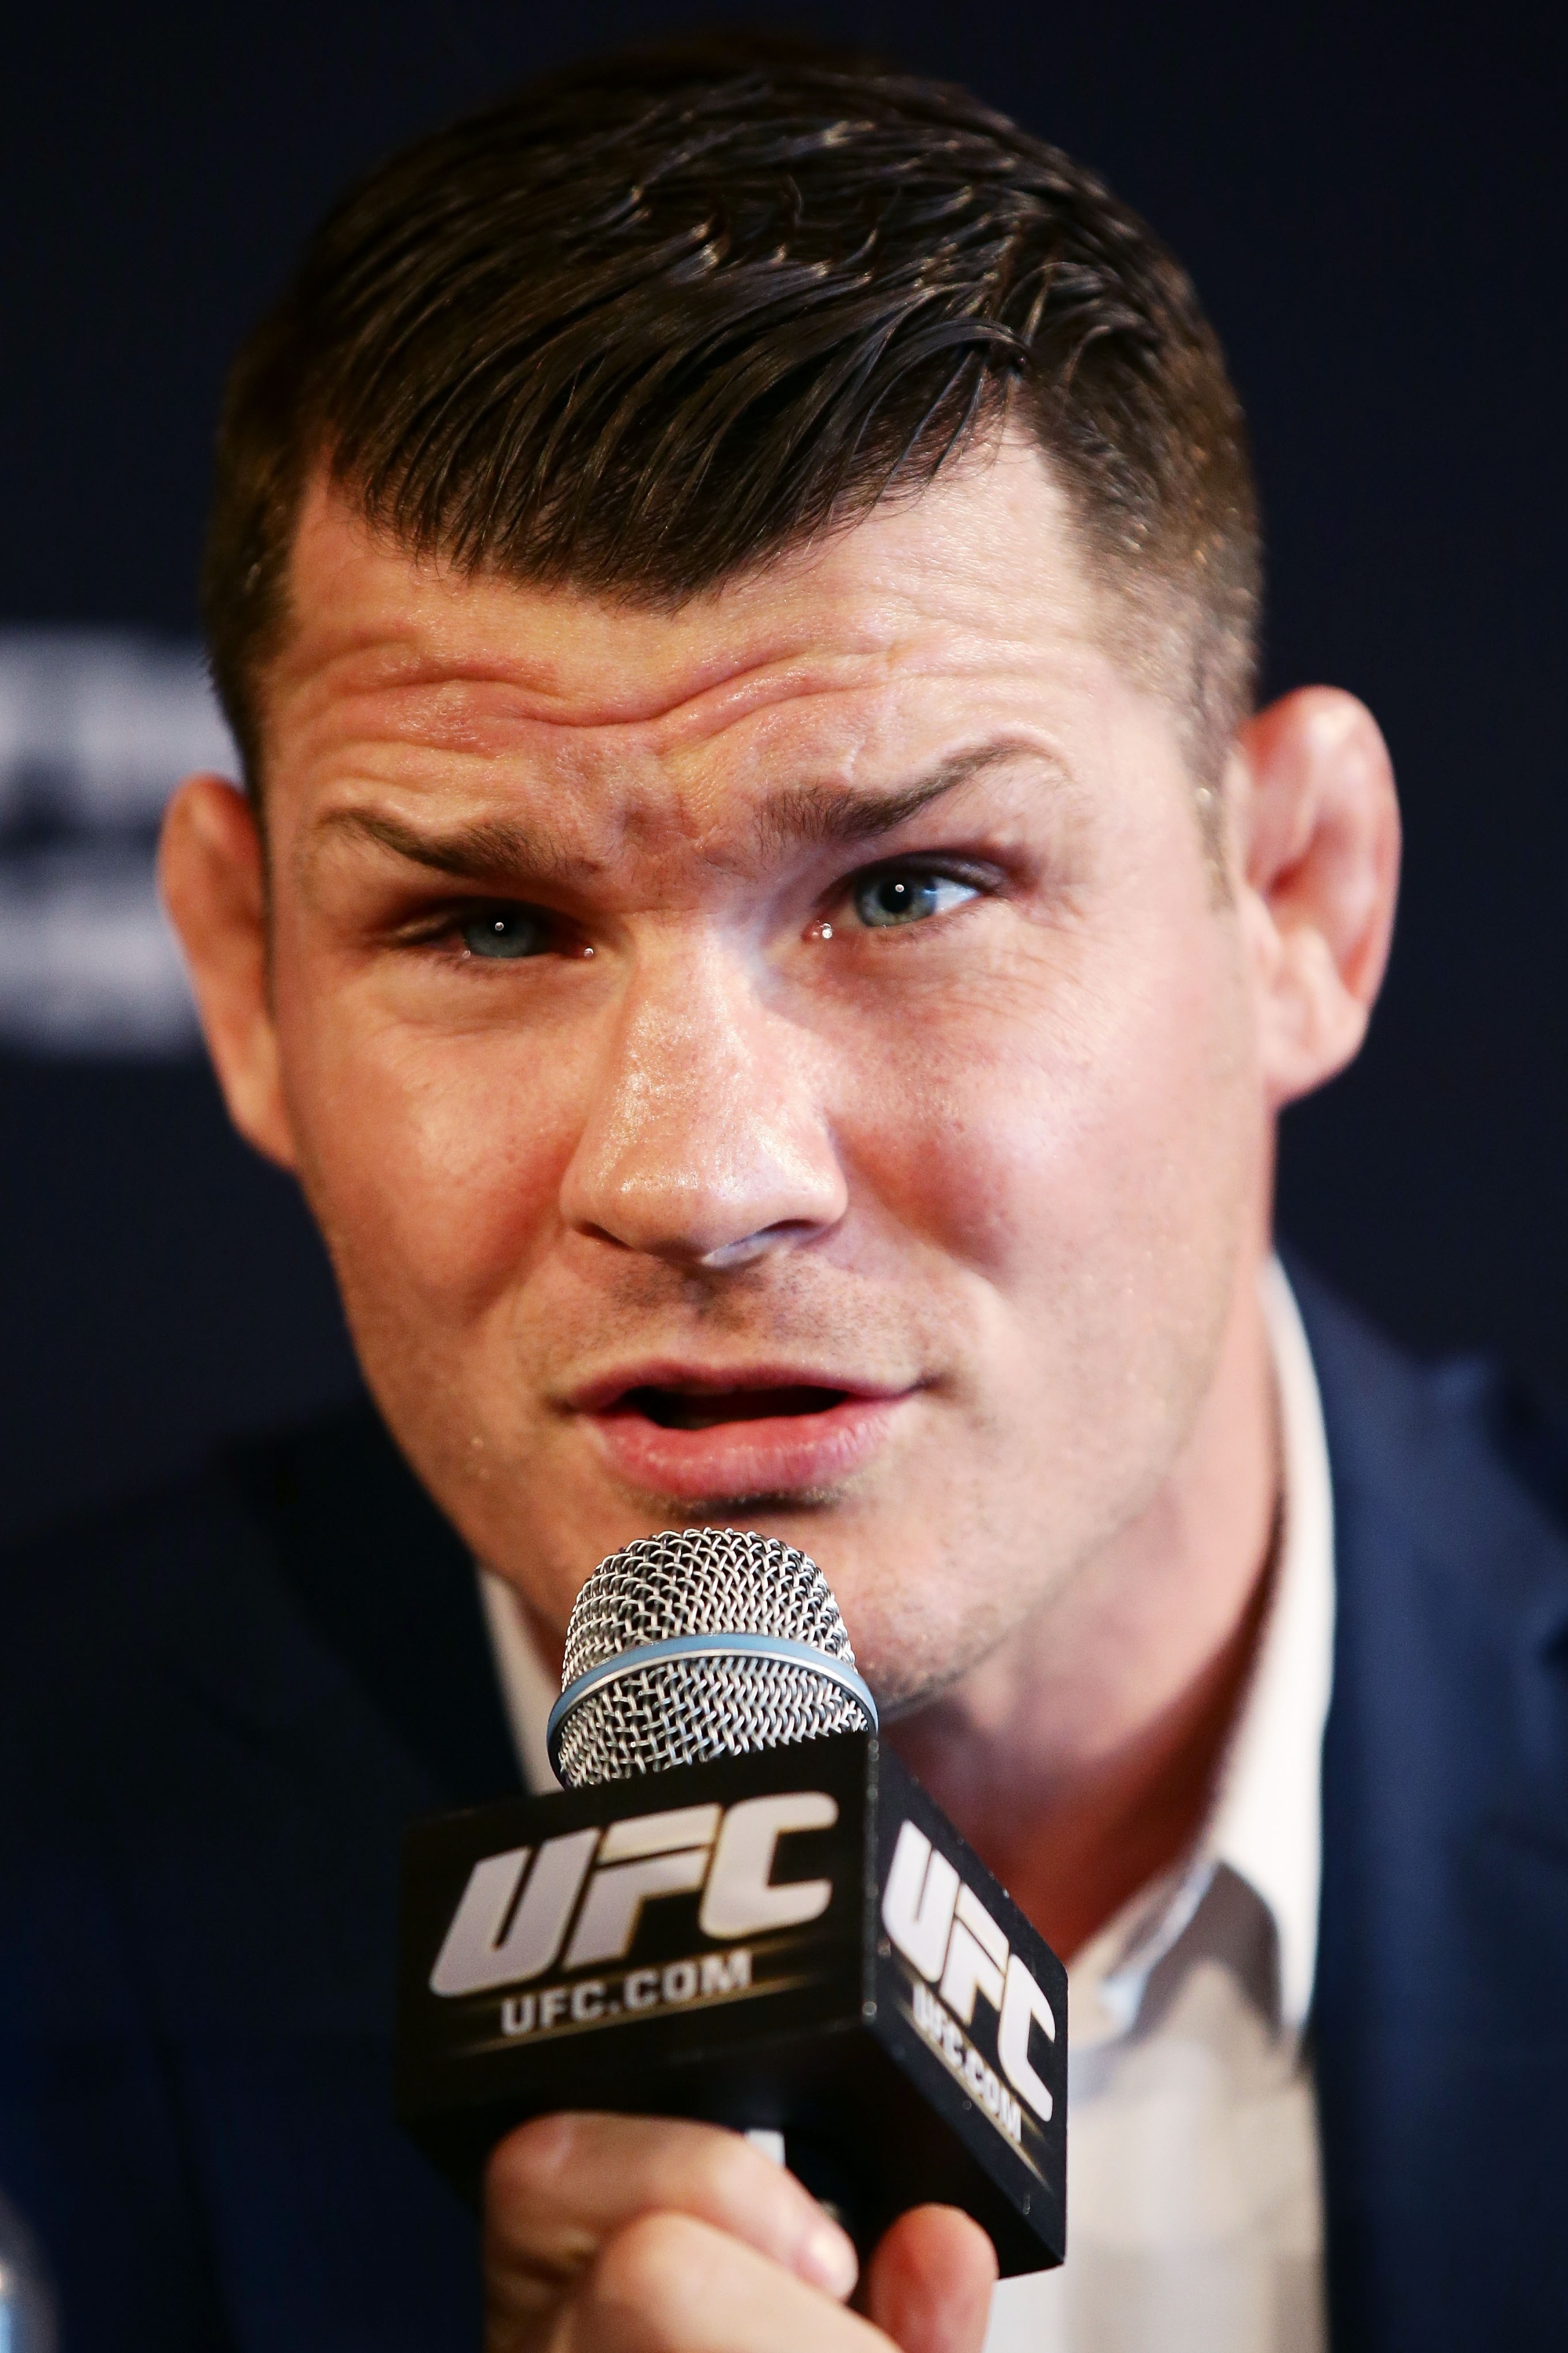 UFC middleweight Michael Bisping said Cung Le got off on a loophole. (Photo by Matt King/Getty Images)